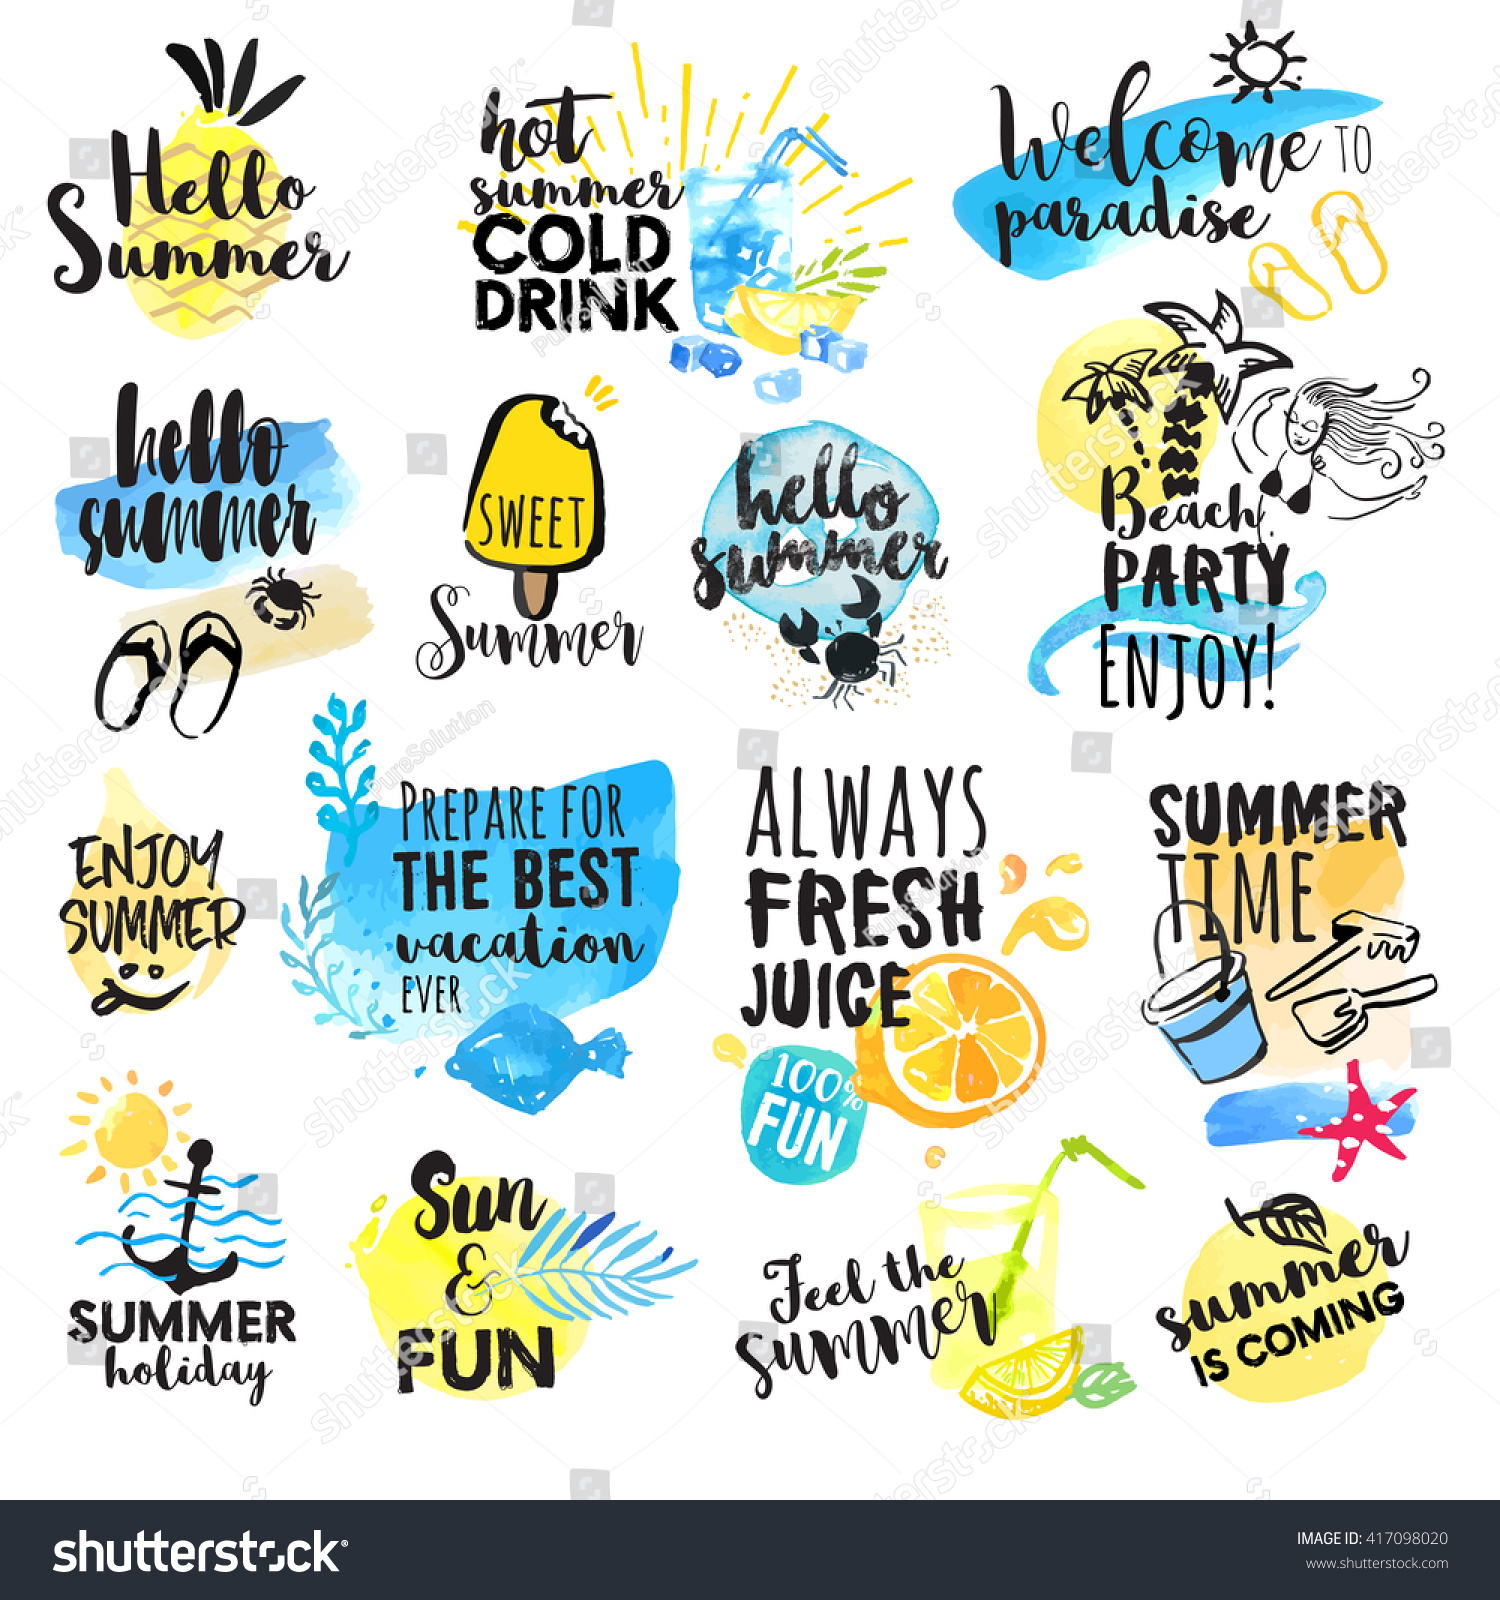 Set of hand drawn watercolor summer signs. Vector illustrations for summer holiday, travel agency, restaurant and bar, menu, sea and sun, beach vacation and party. #417098020